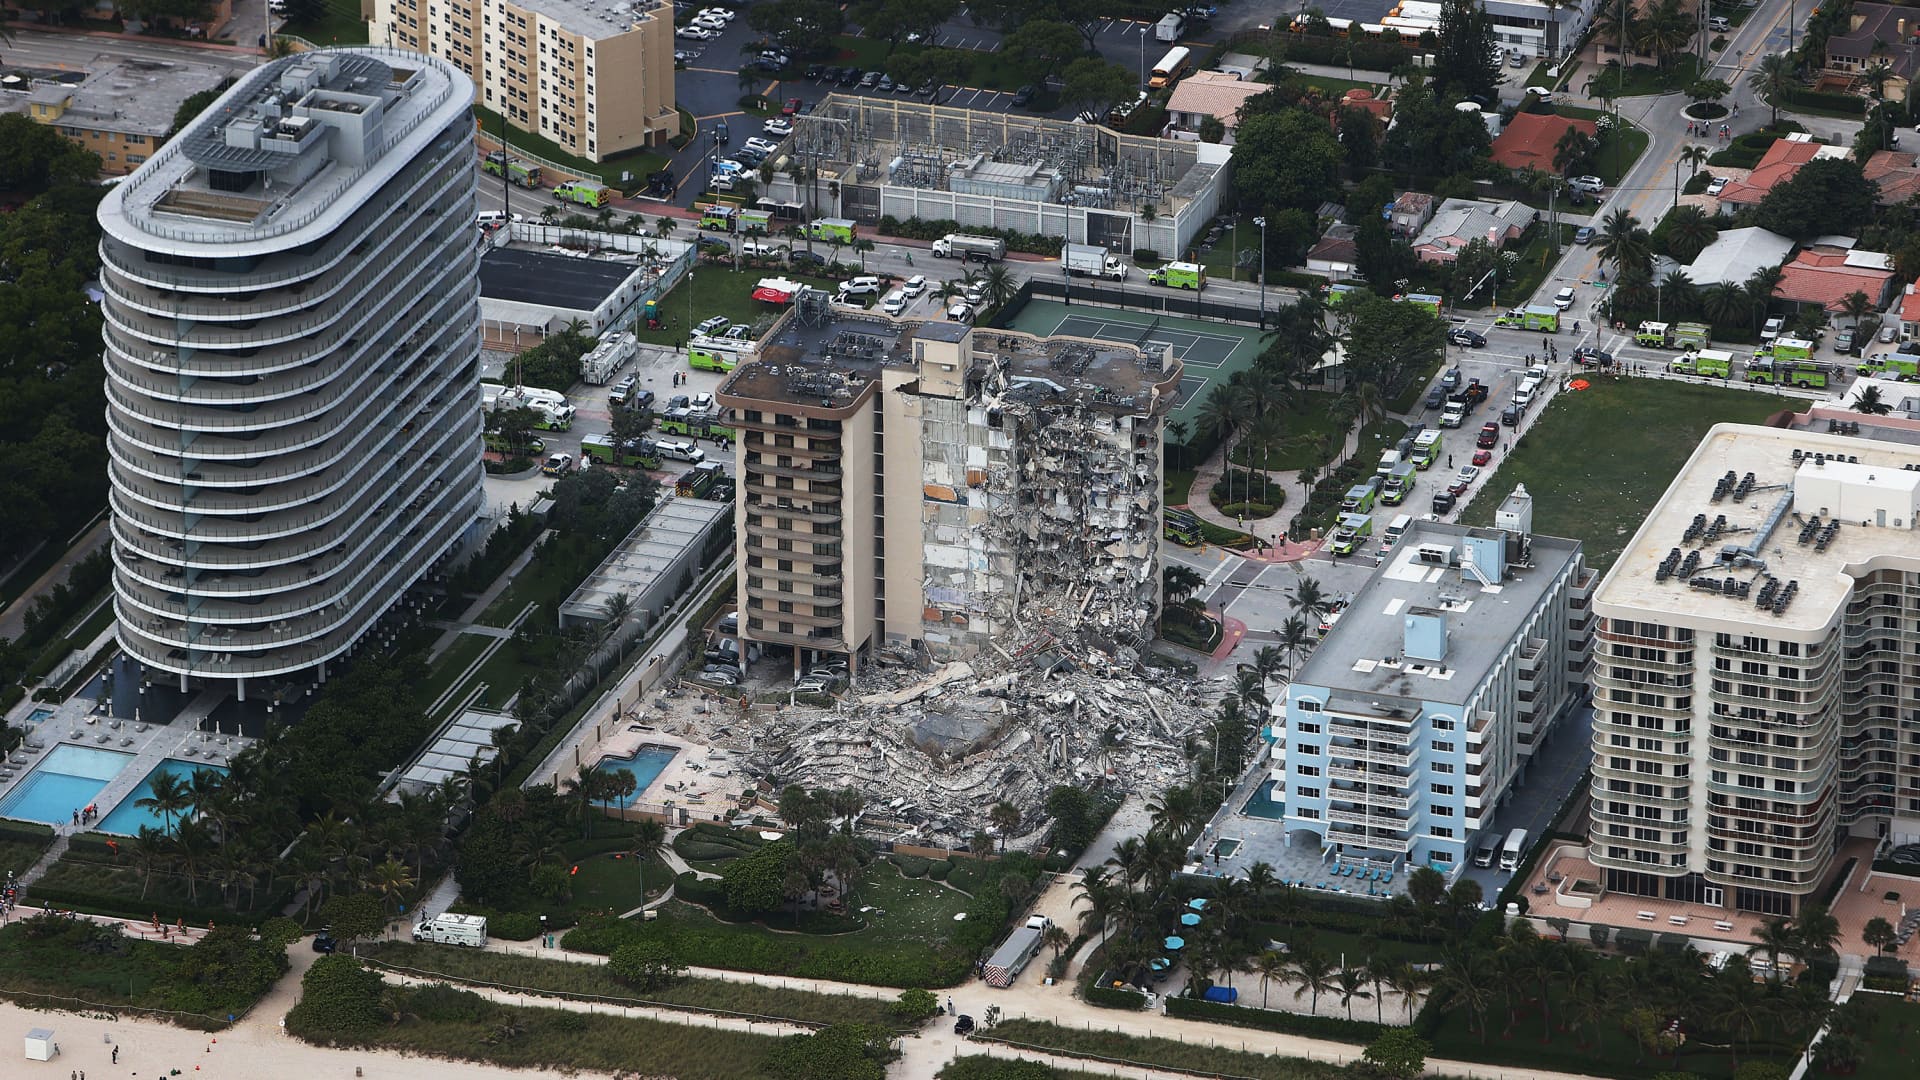 In this aerial view, search and rescue personnel work after the partial collapse of the 12-story Champlain Towers South condo building on June 24, 2021 in Surfside, Florida.